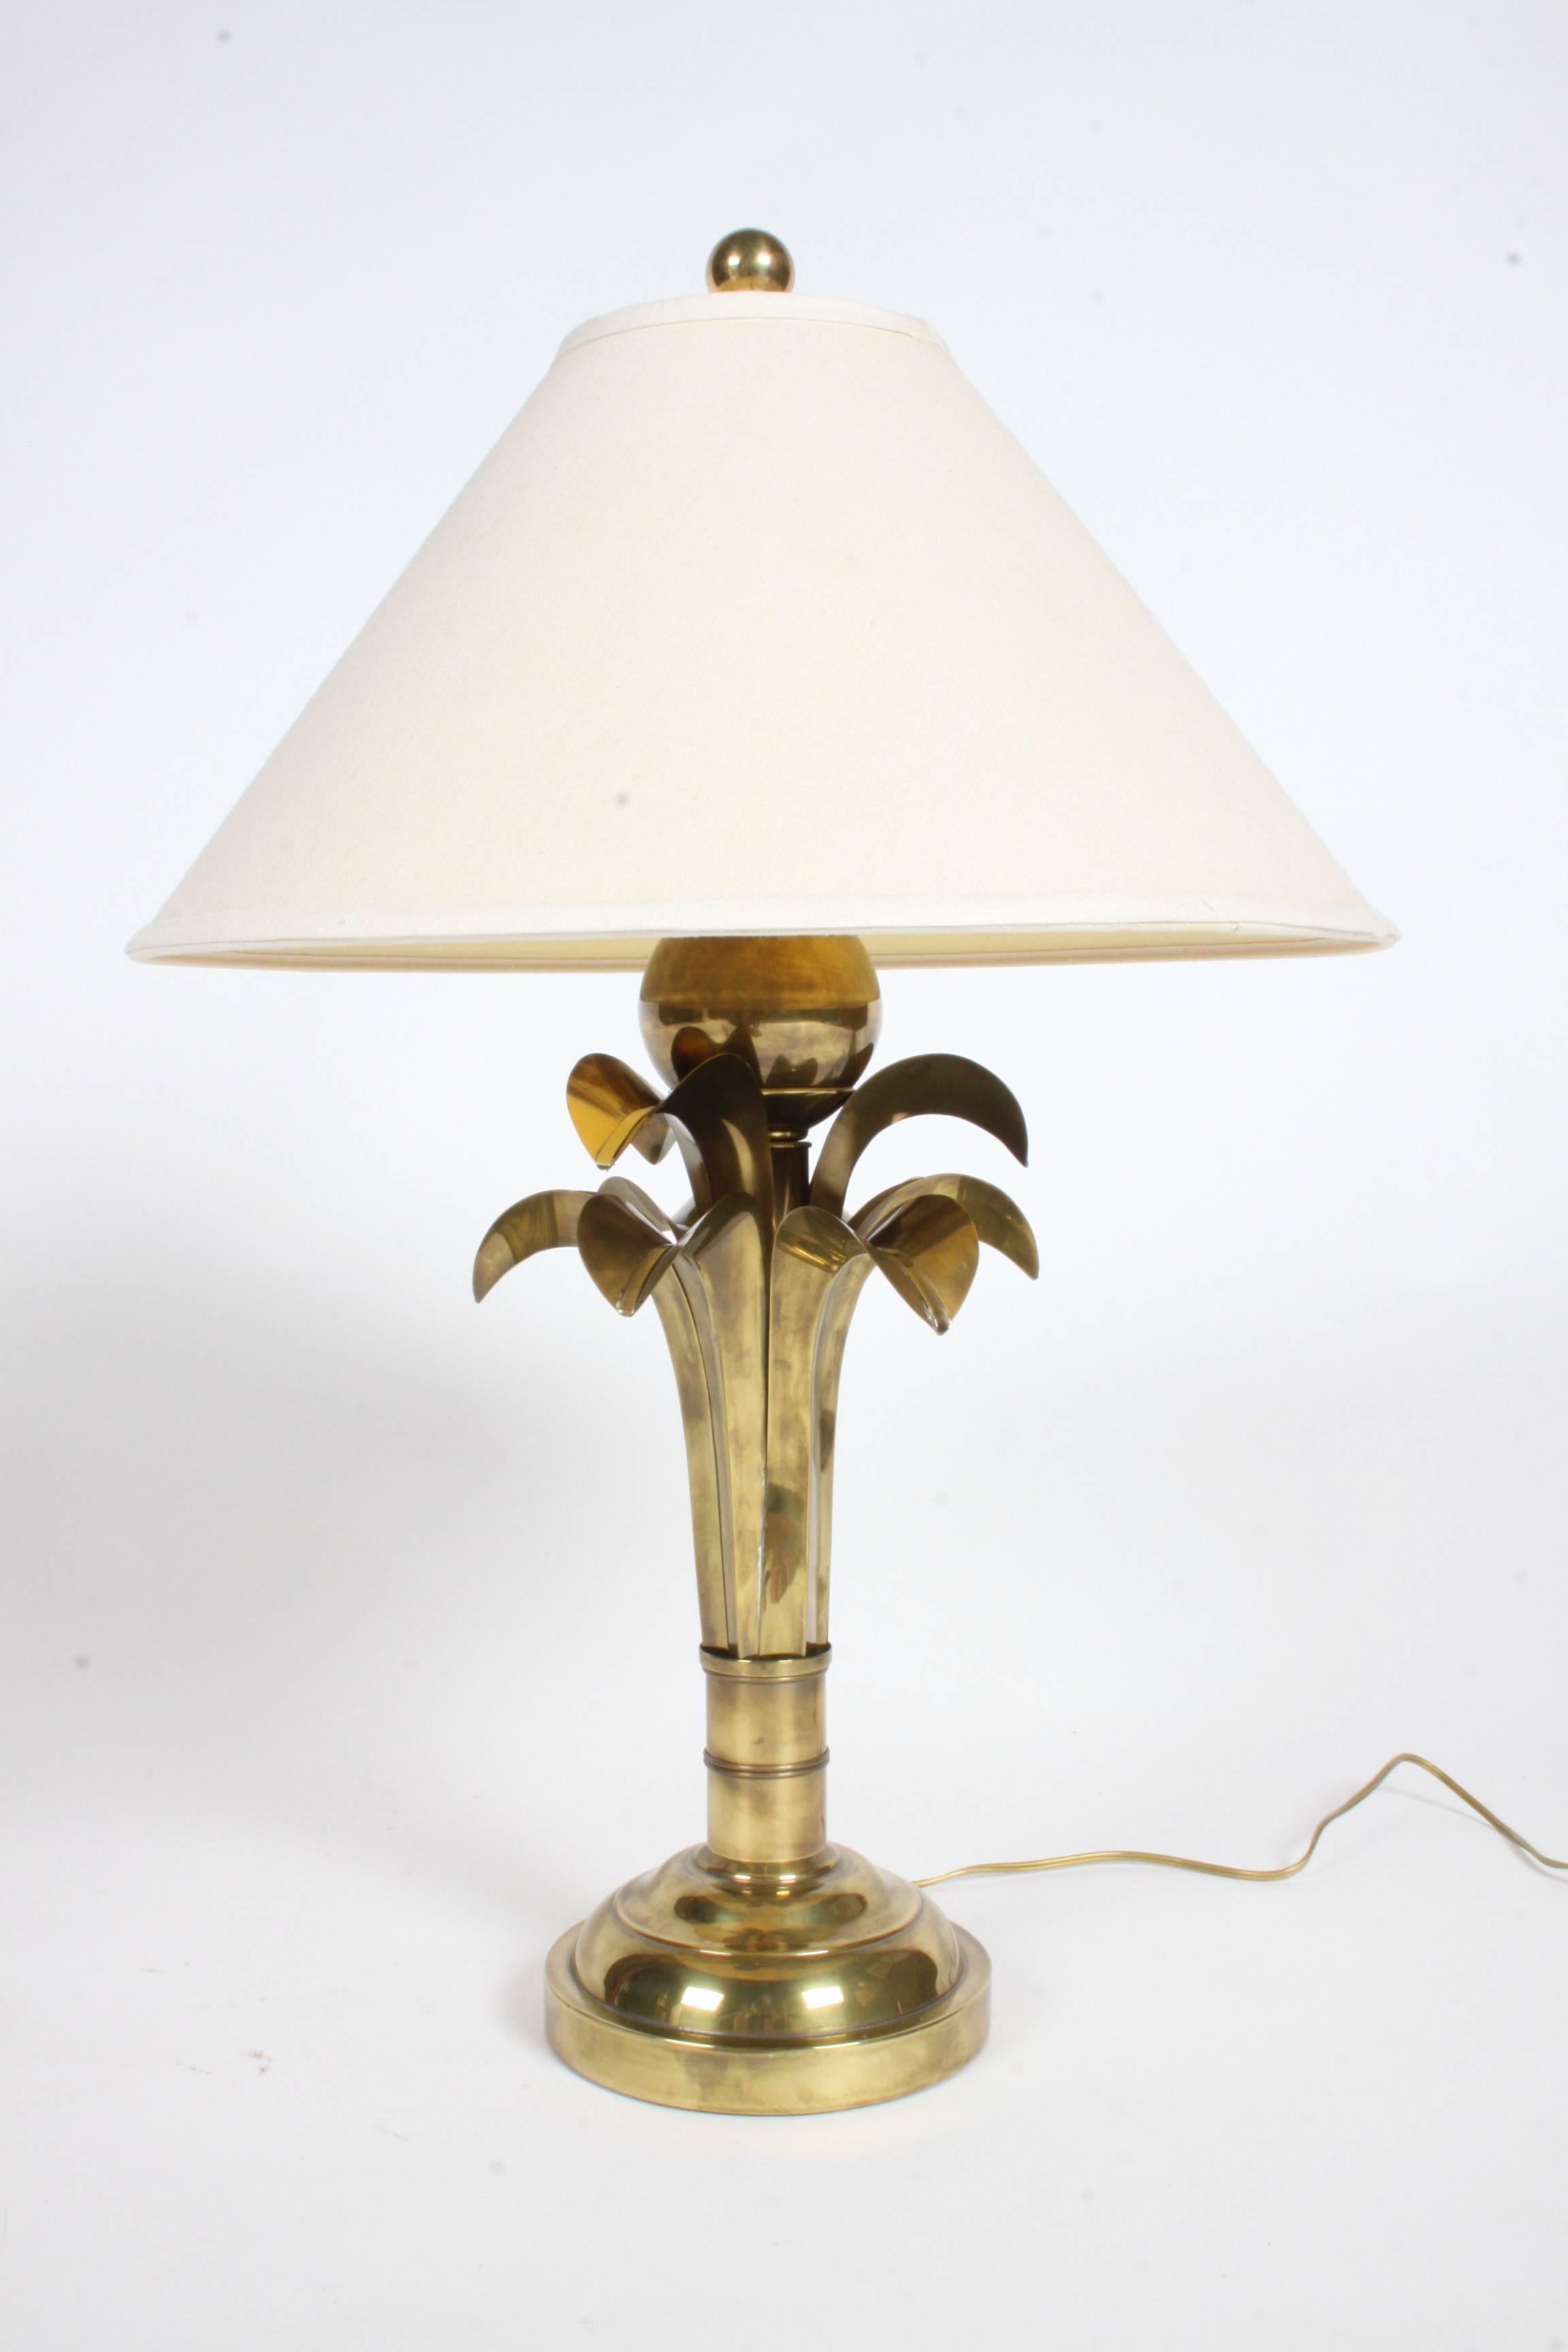 Pair of brass palm leaf tree lamps in the style of Maison Charles, circa 1970s, possible by Hart Associates Lighting. Very well made, solid brass, great warm brass patina. Original shades are 20.25